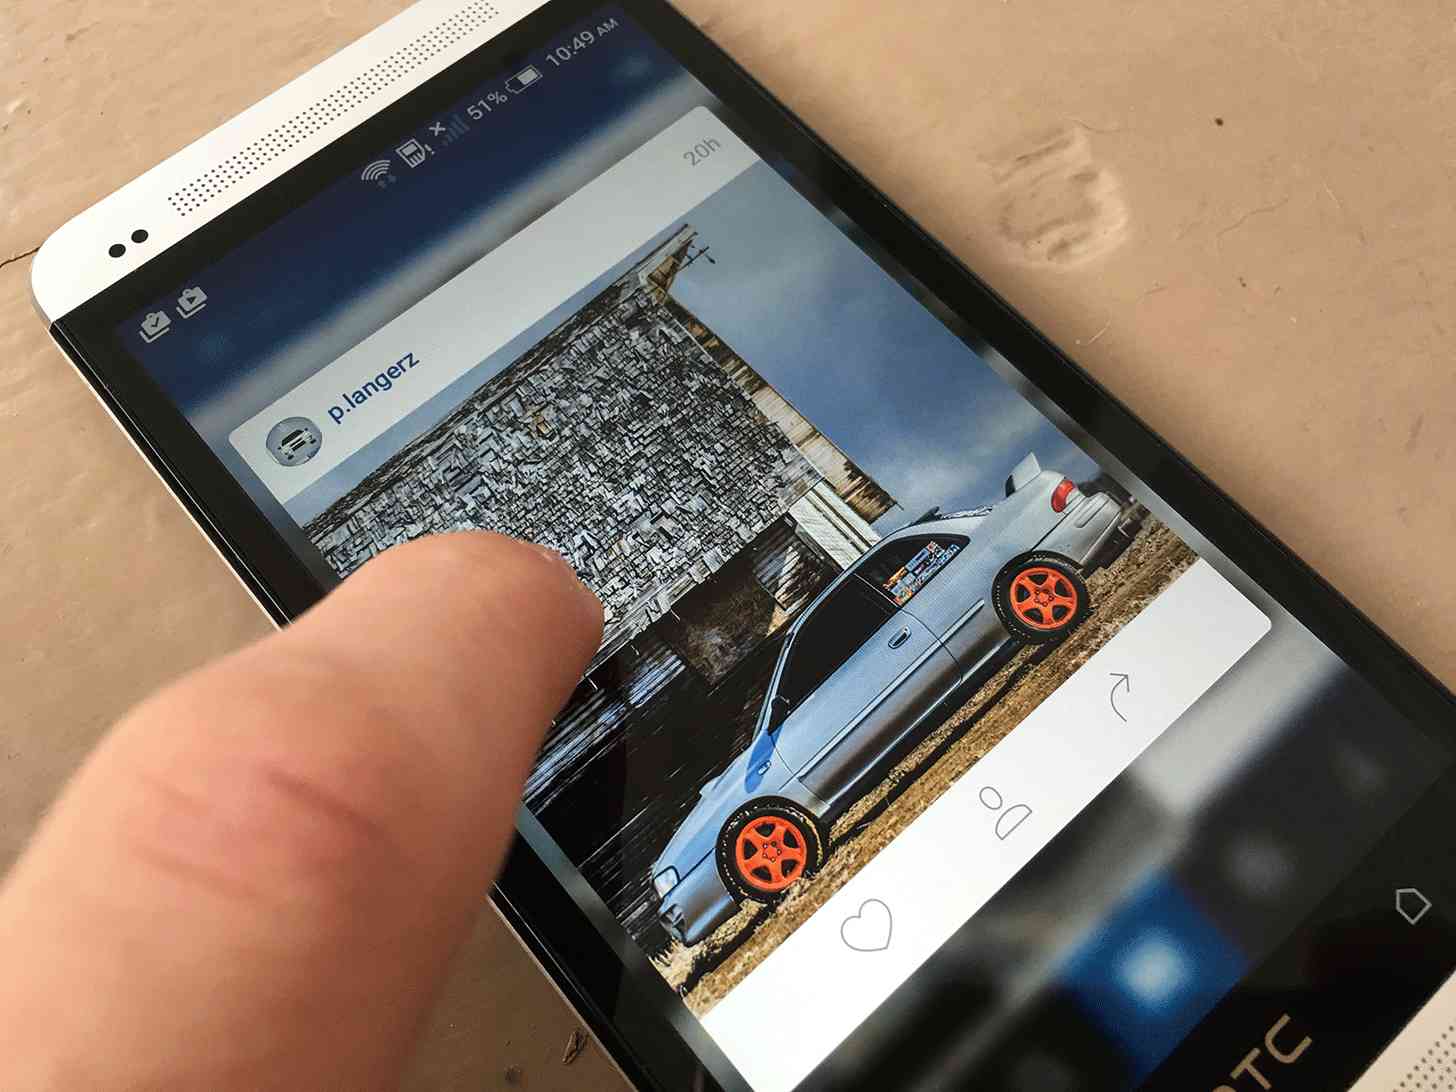 Instagram Android 3D Touch long press